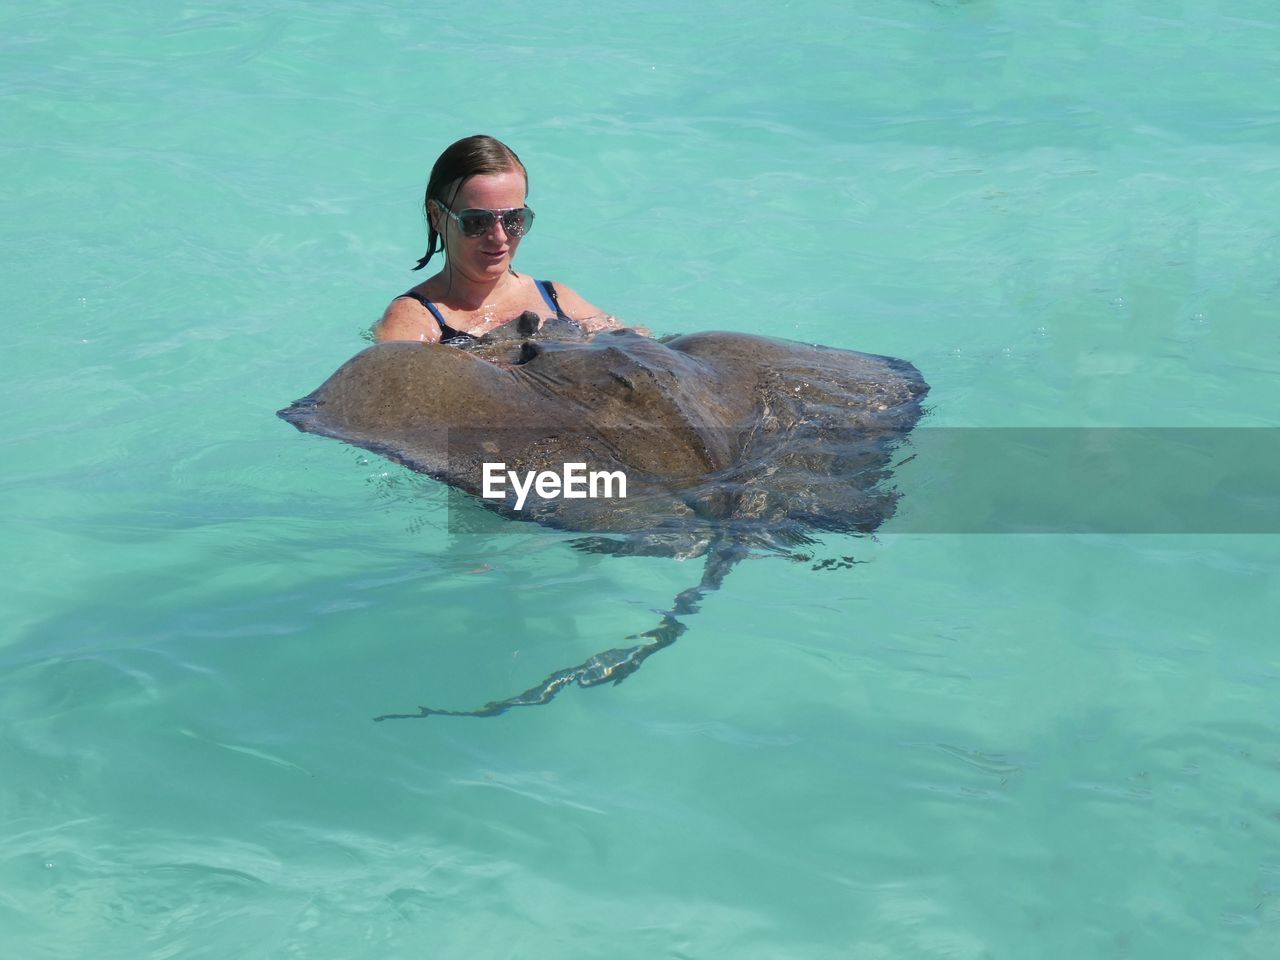 Woman swimming by stingray in sea